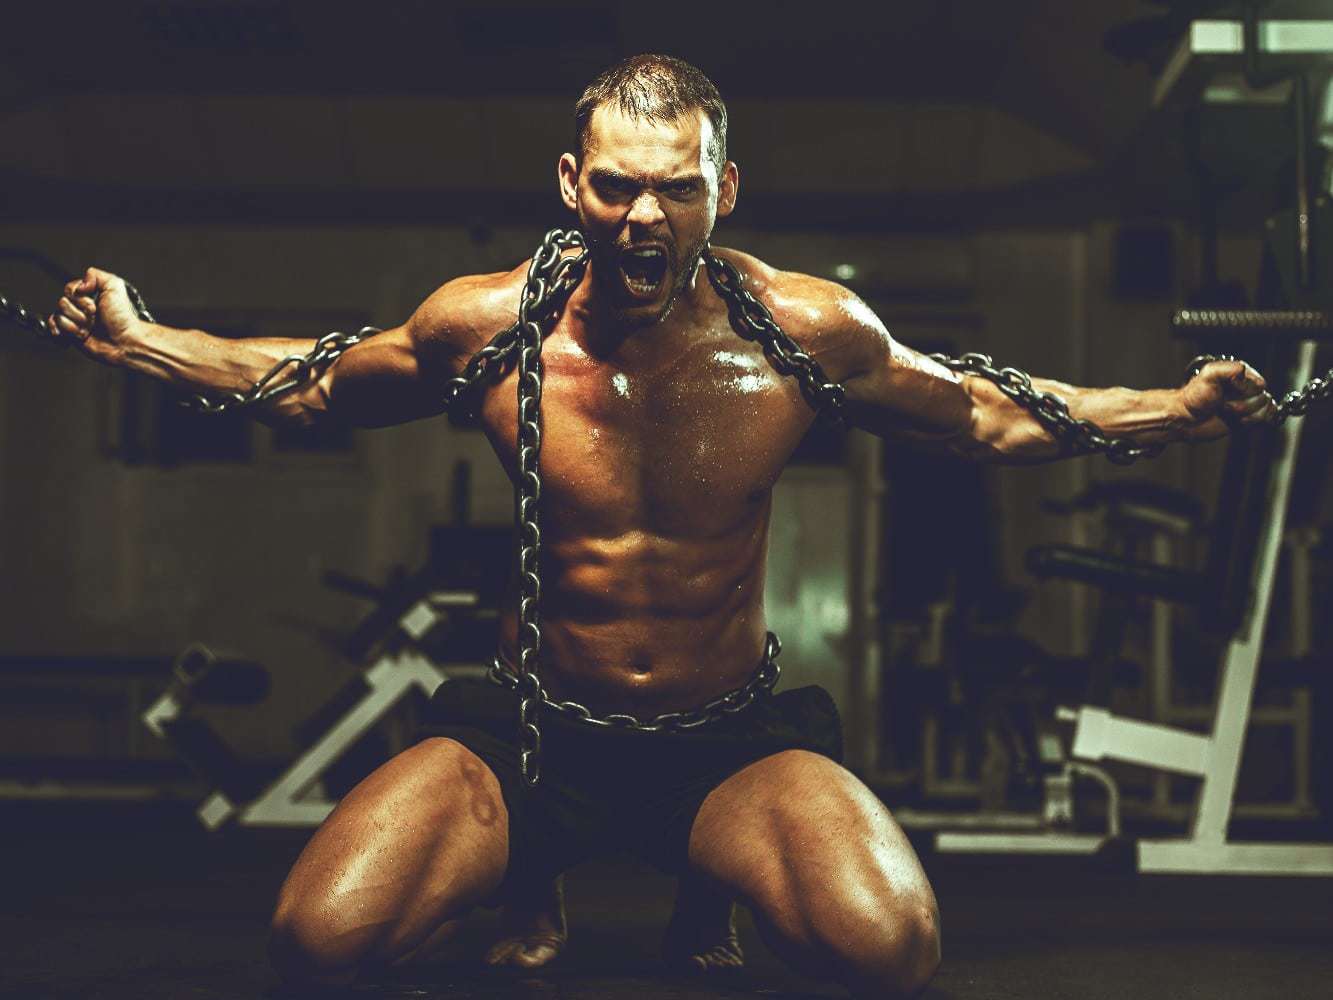 Muscular man in chains breaking free